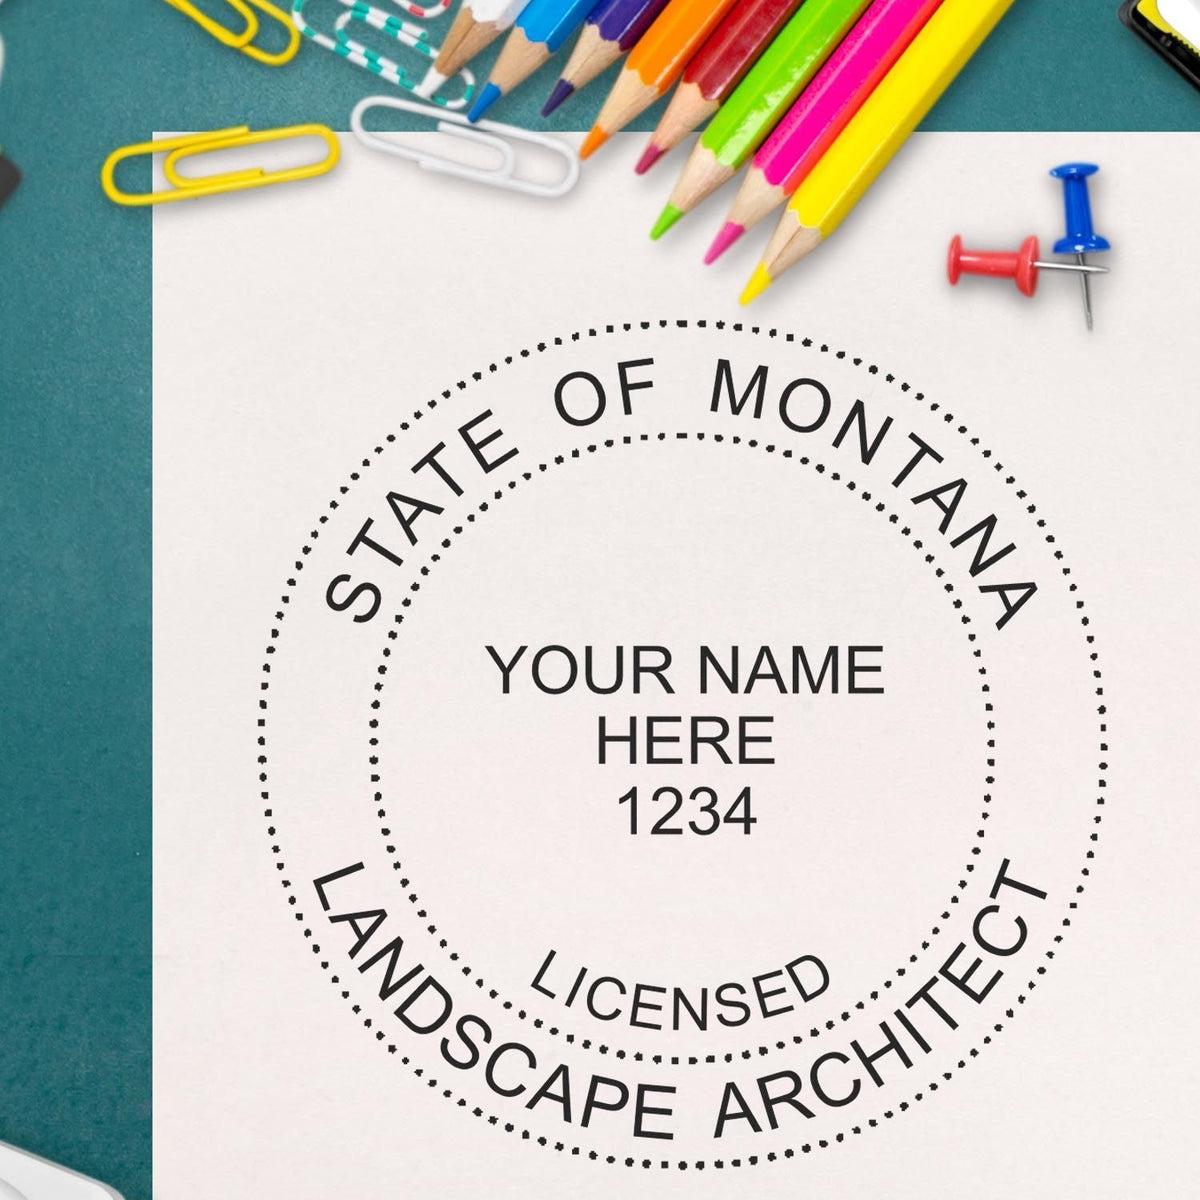 This paper is stamped with a sample imprint of the Slim Pre-Inked Montana Landscape Architect Seal Stamp, signifying its quality and reliability.